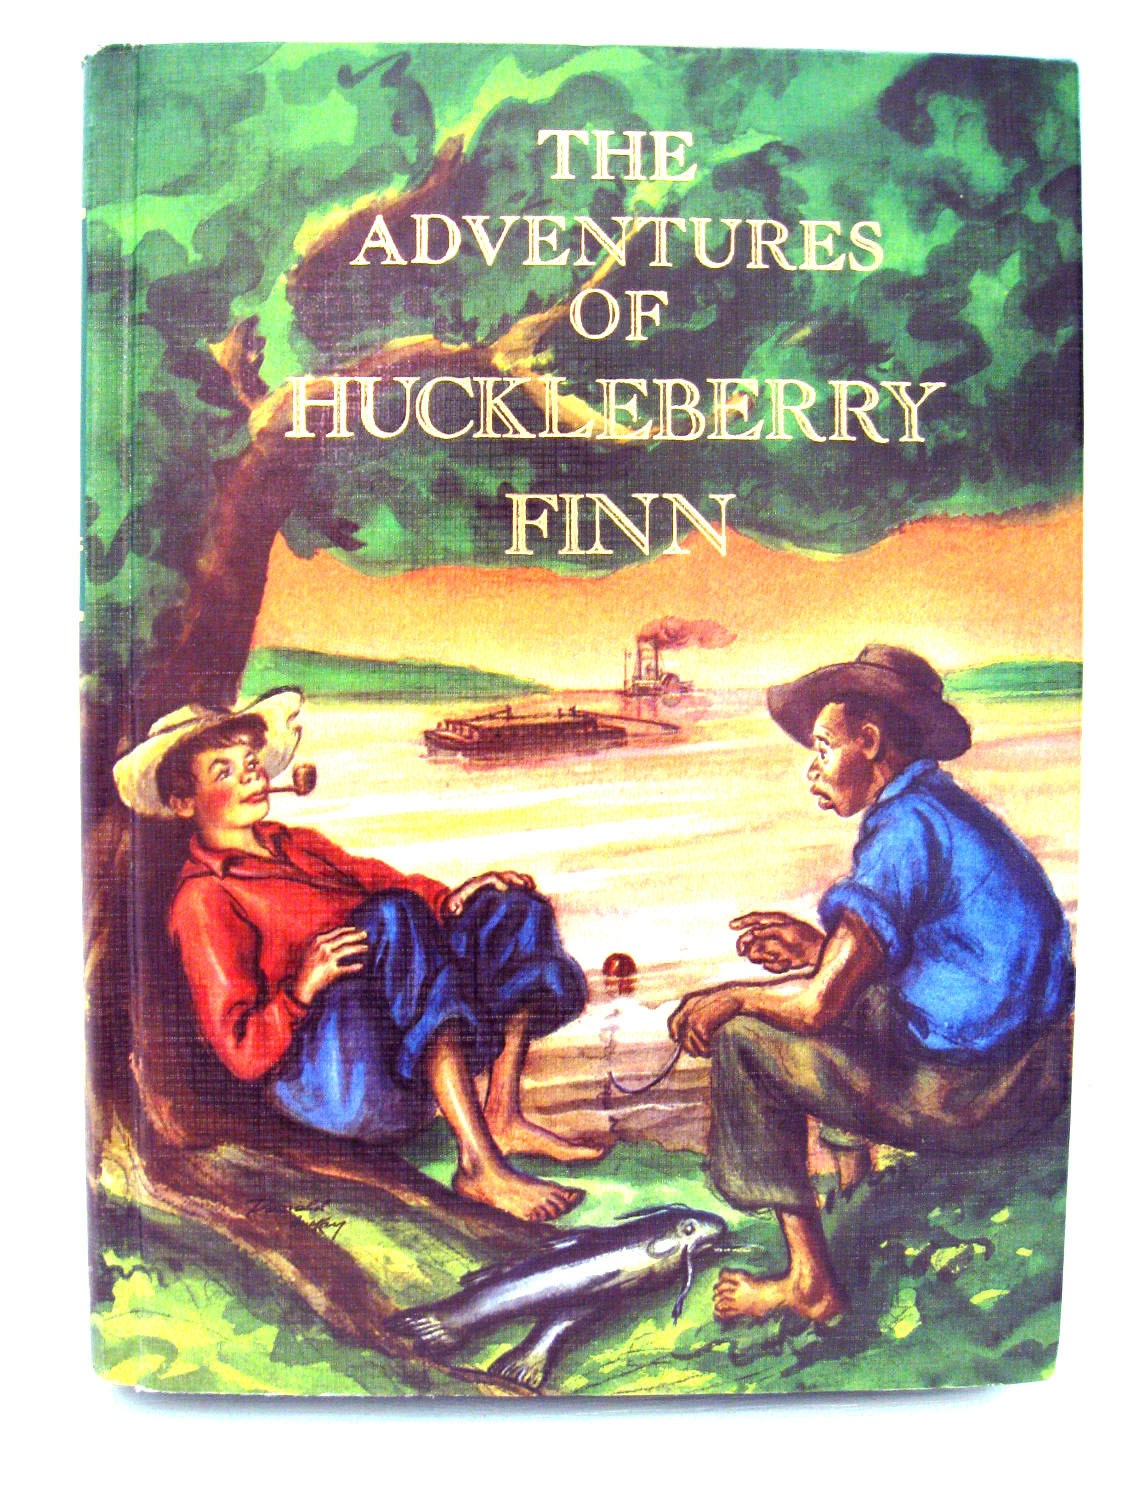 The Adventures of Huckleberry Finn download the last version for iphone